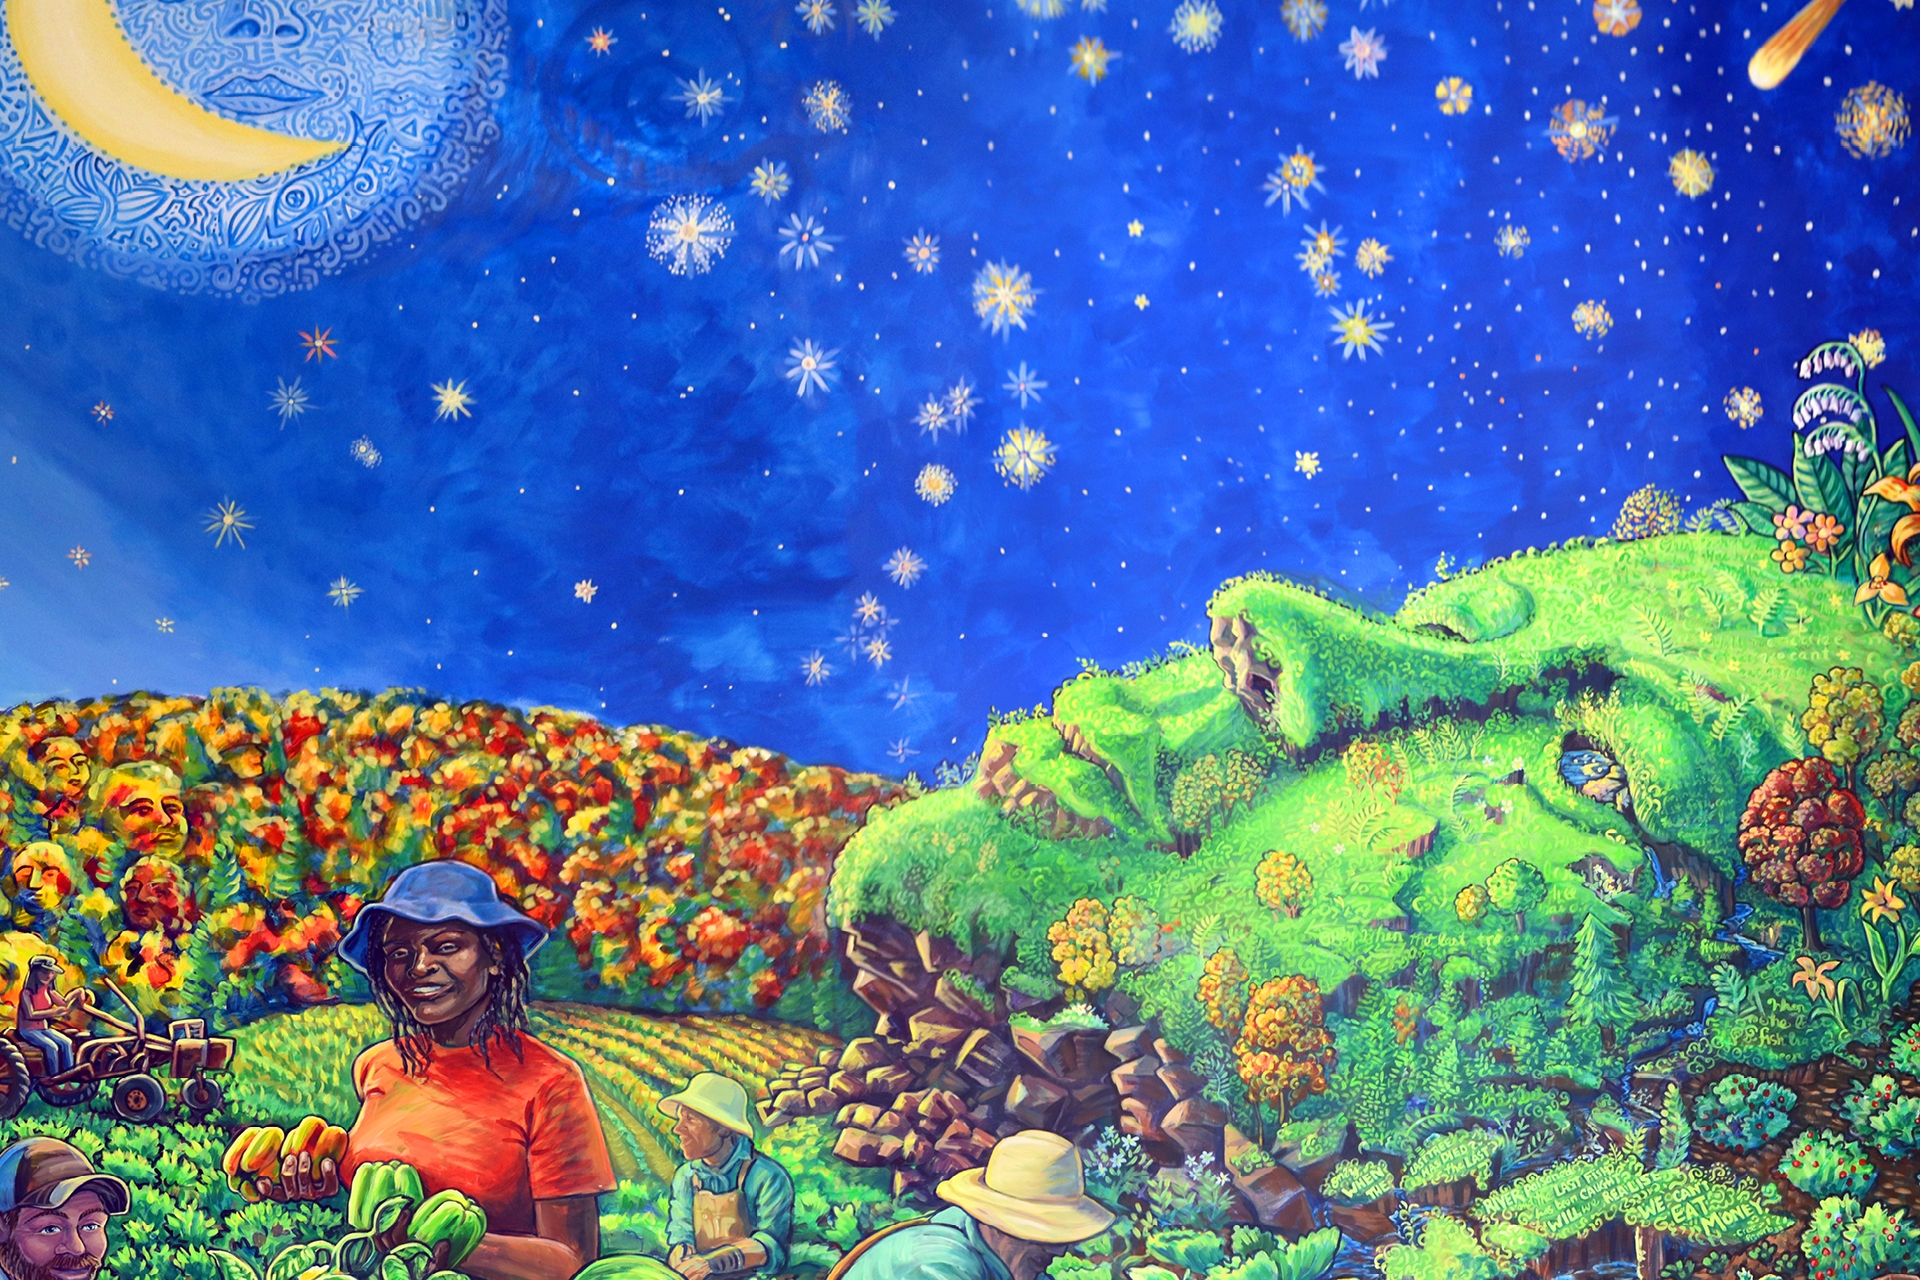 Mural painting with a woman's face looking up disguised as a bright green hillside on the right, farmers harvesting crops with a fall floliage landscape on the left, and a starry blue night spanning the top of the scene